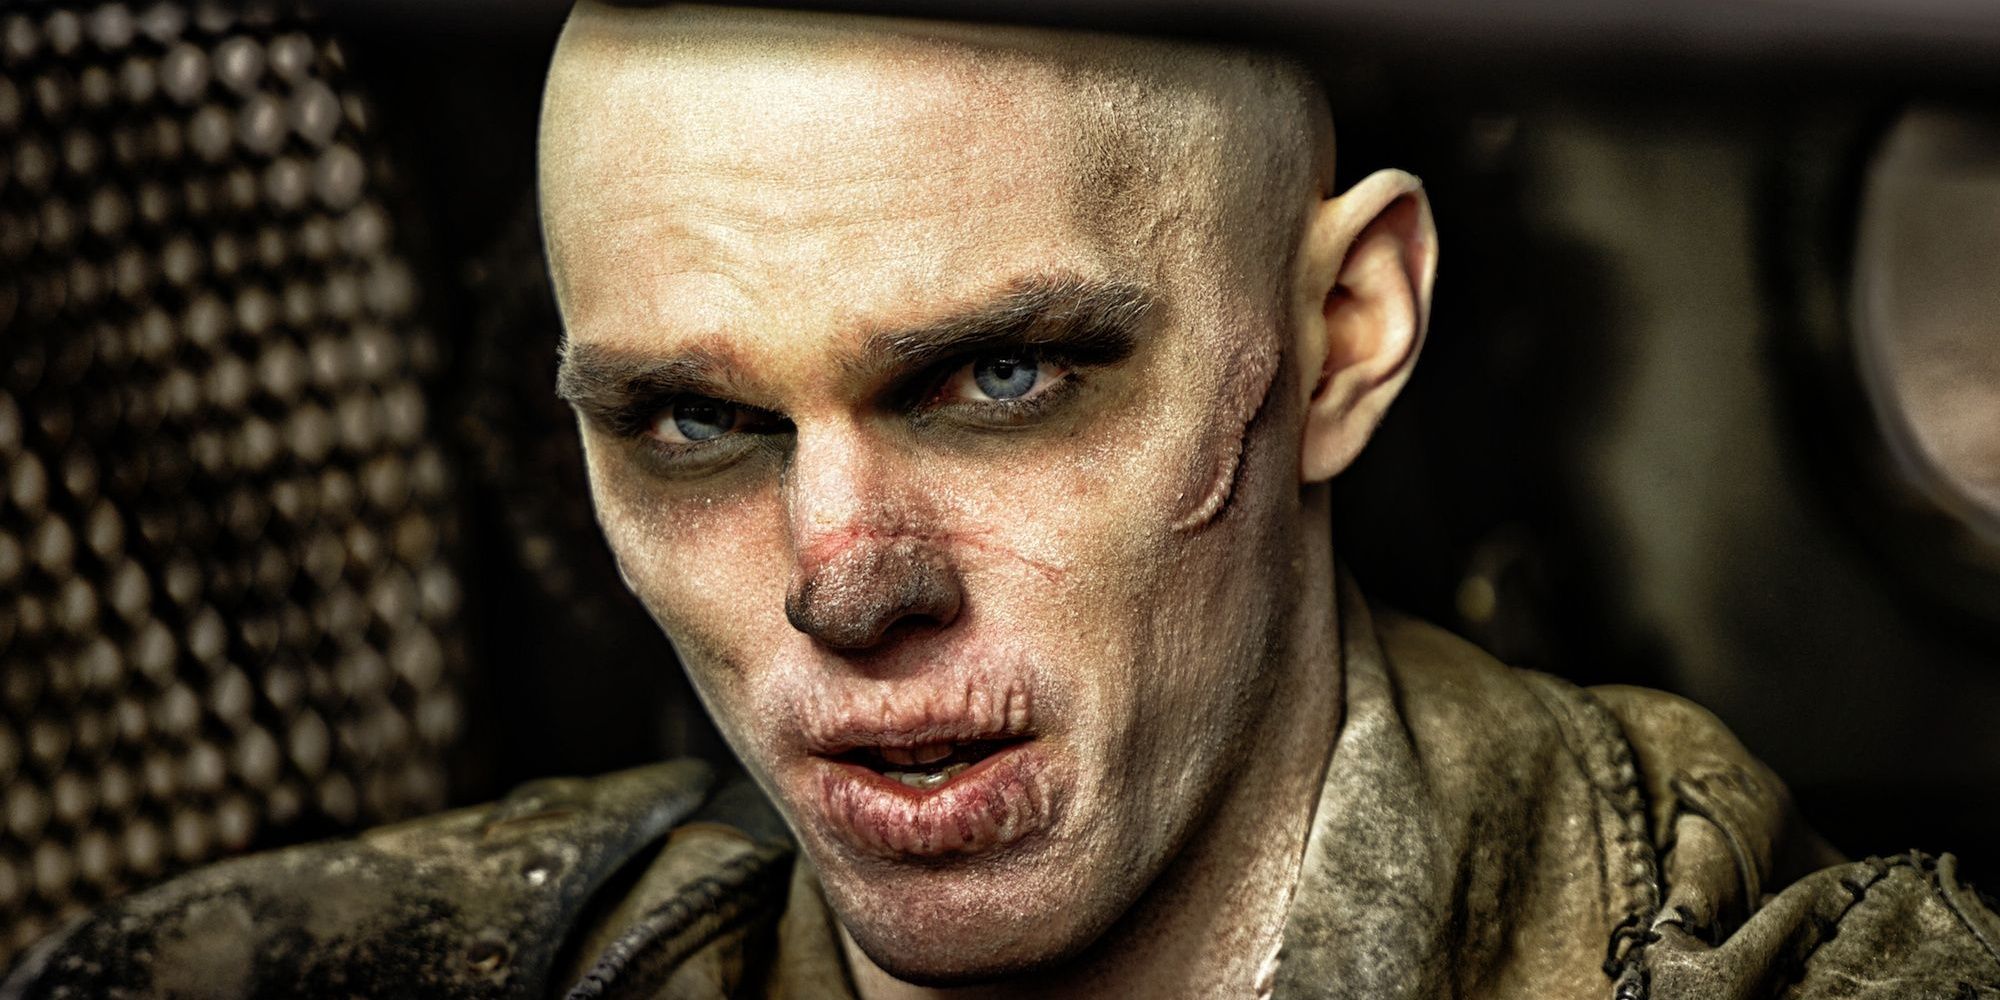 Mad Max Furiosa 5 Characters That Should Return (& 5 That Should Stay Gone)